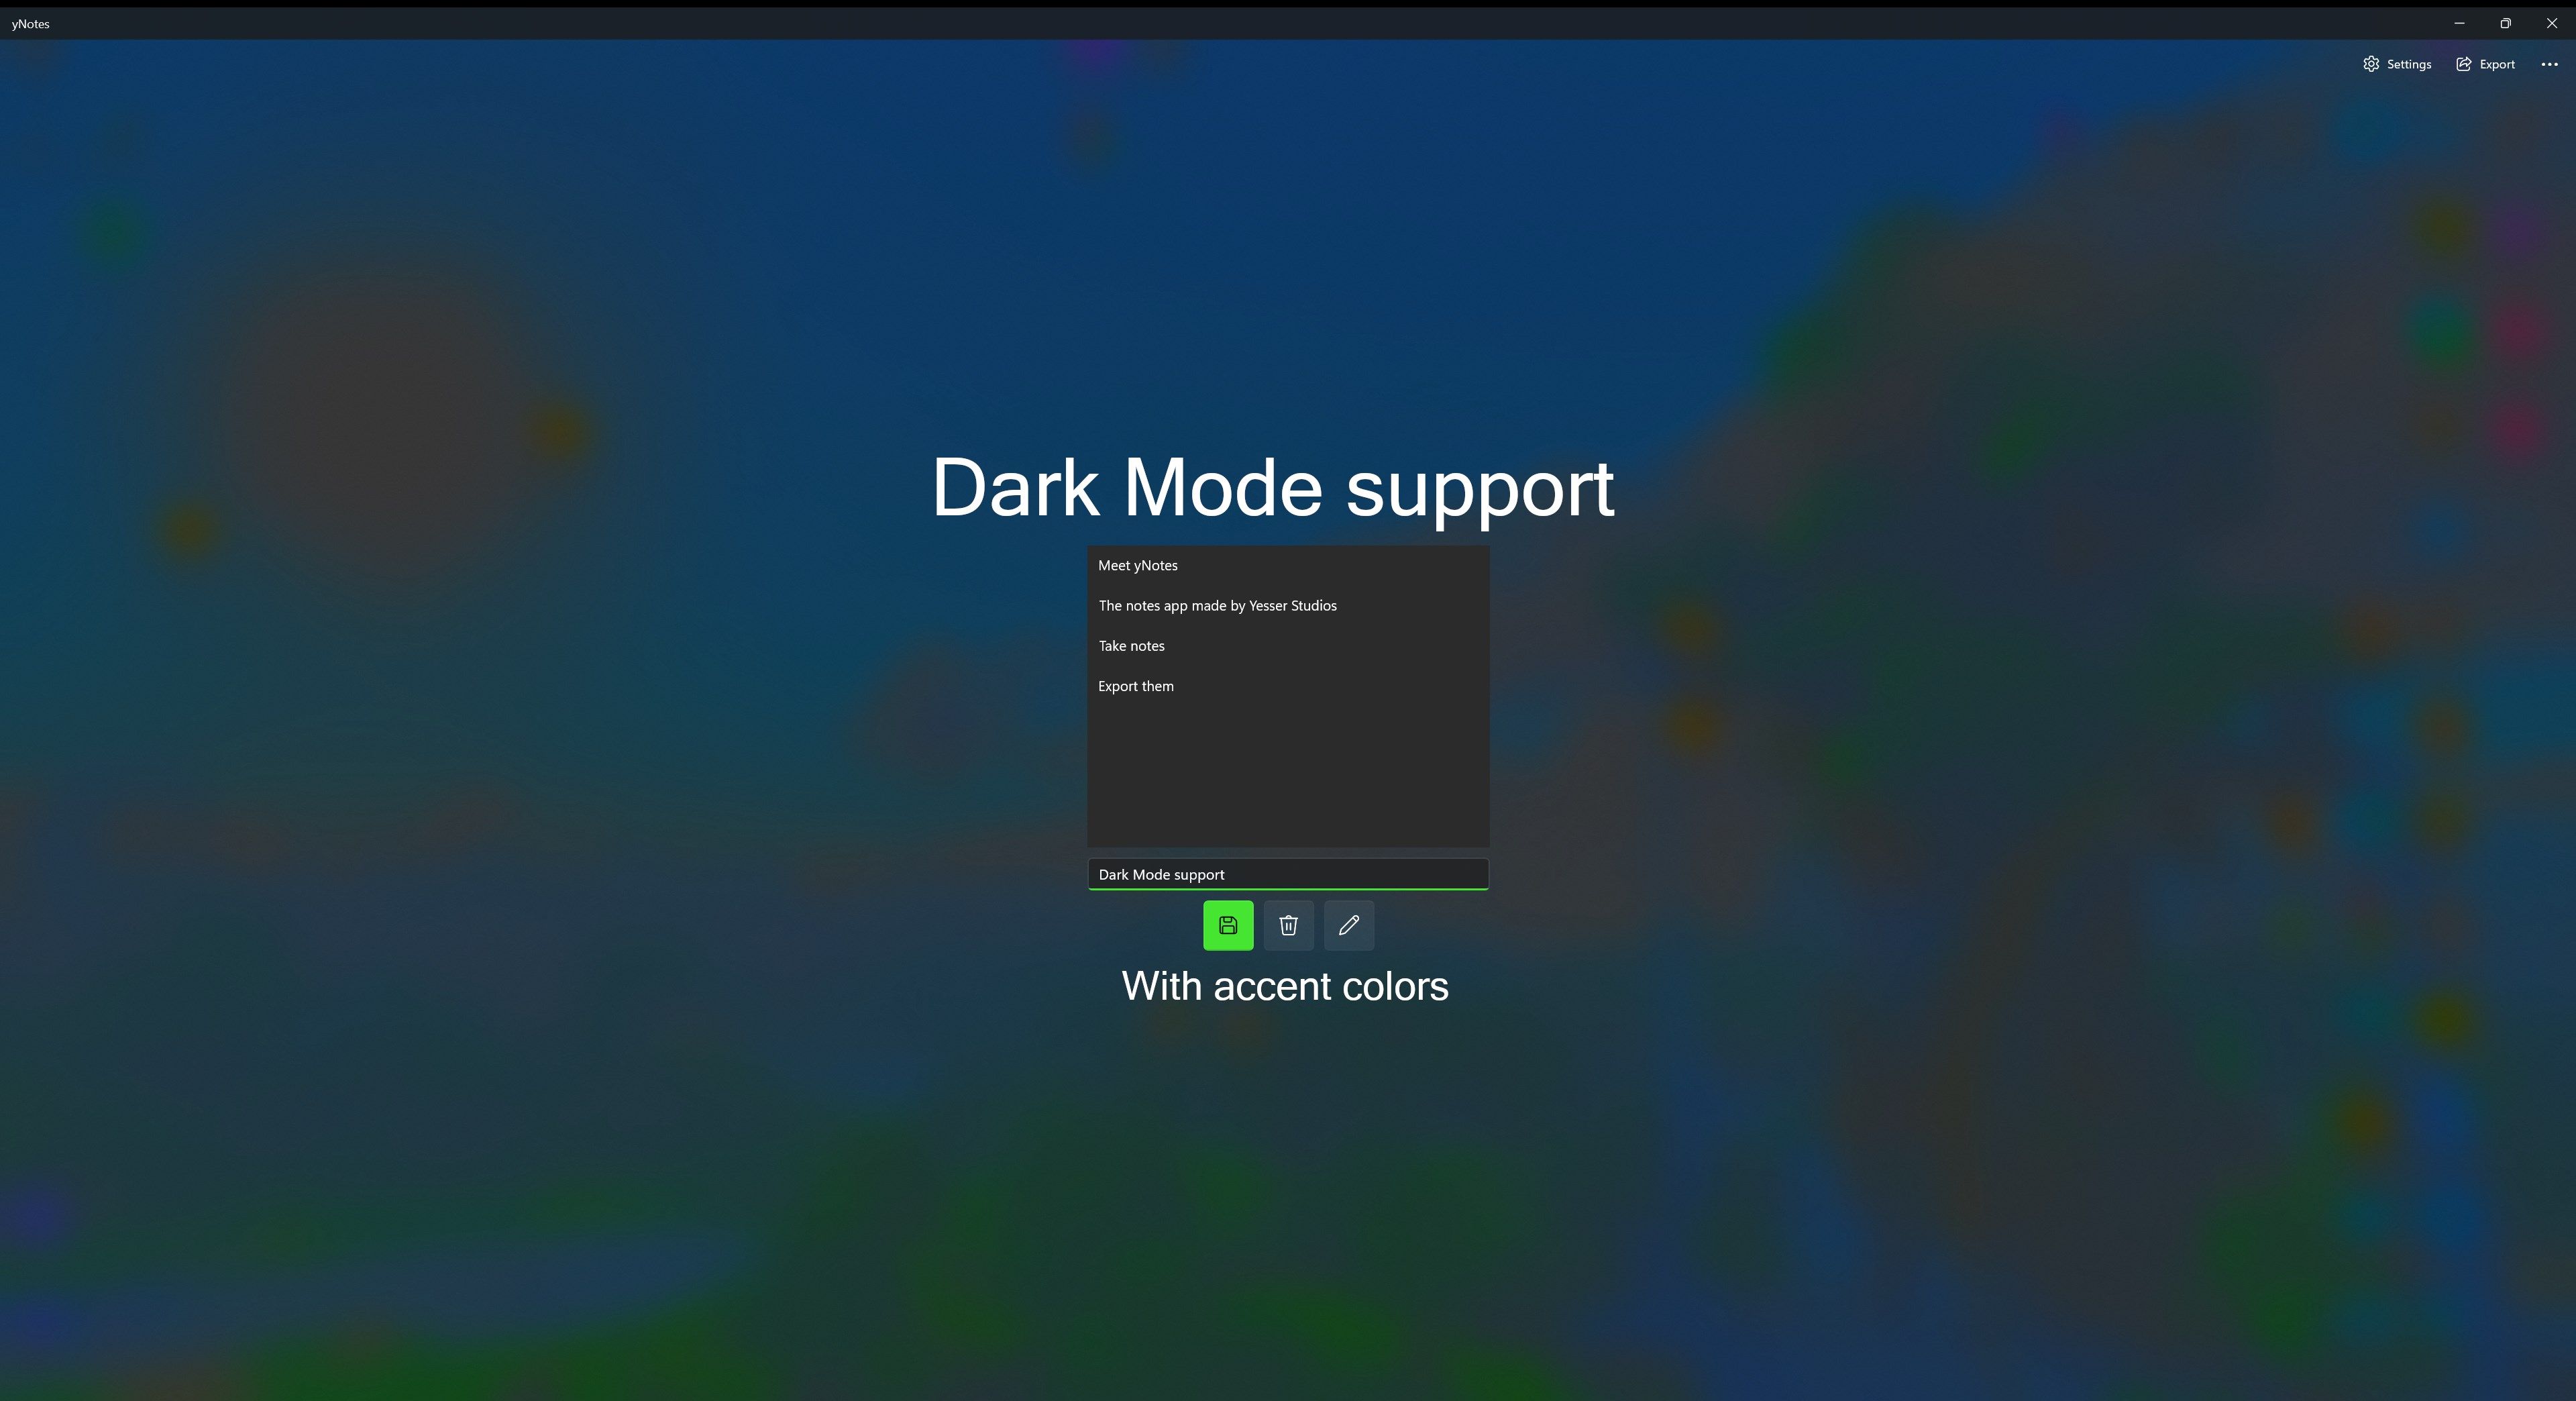 Dark Mode support
With accent colors